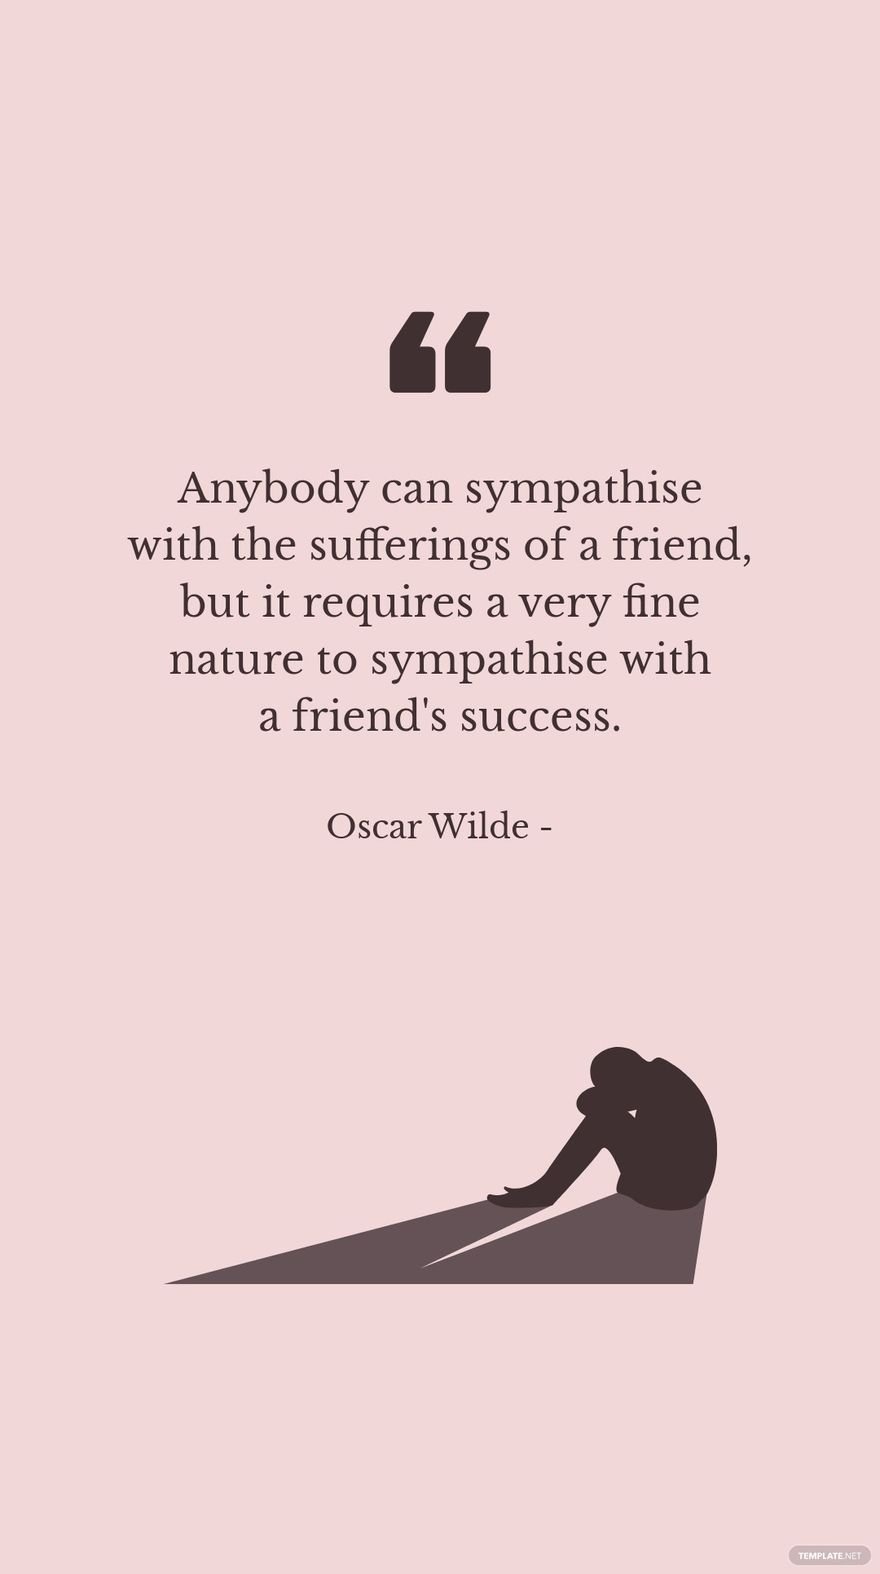 Oscar Wilde - Anybody can sympathise with the sufferings of a friend, but it requires a very fine nature to sympathise with a friend's success.